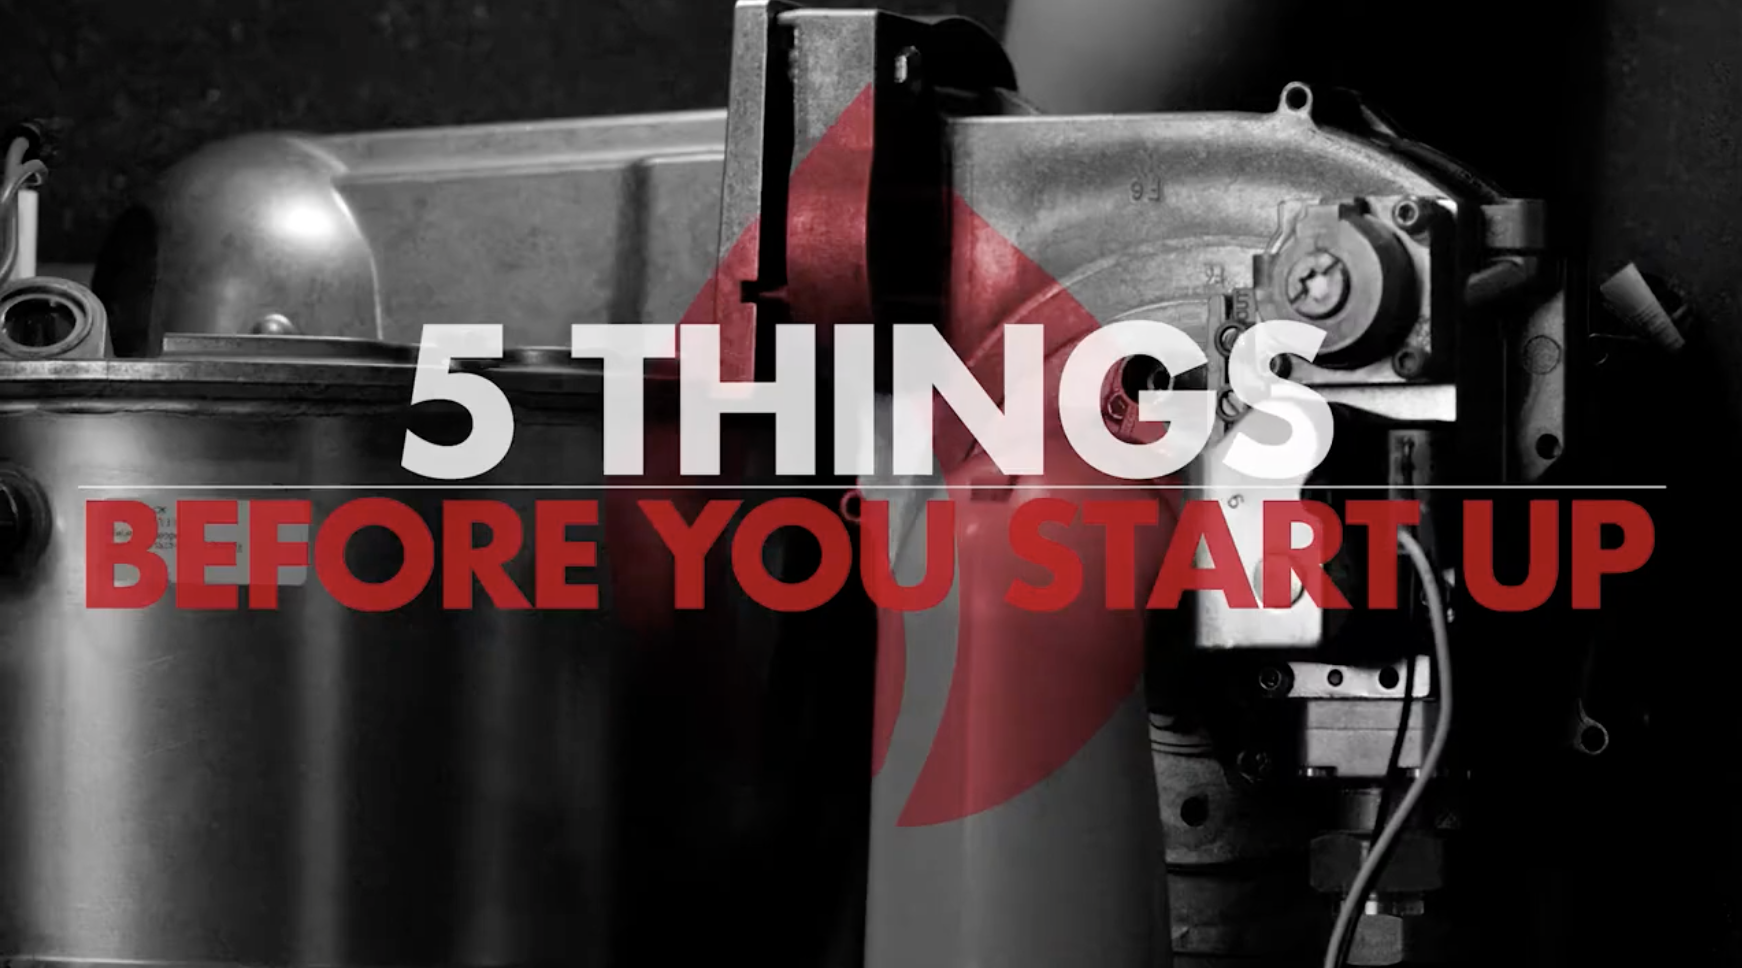 How To: 5 Things Before You Start Up